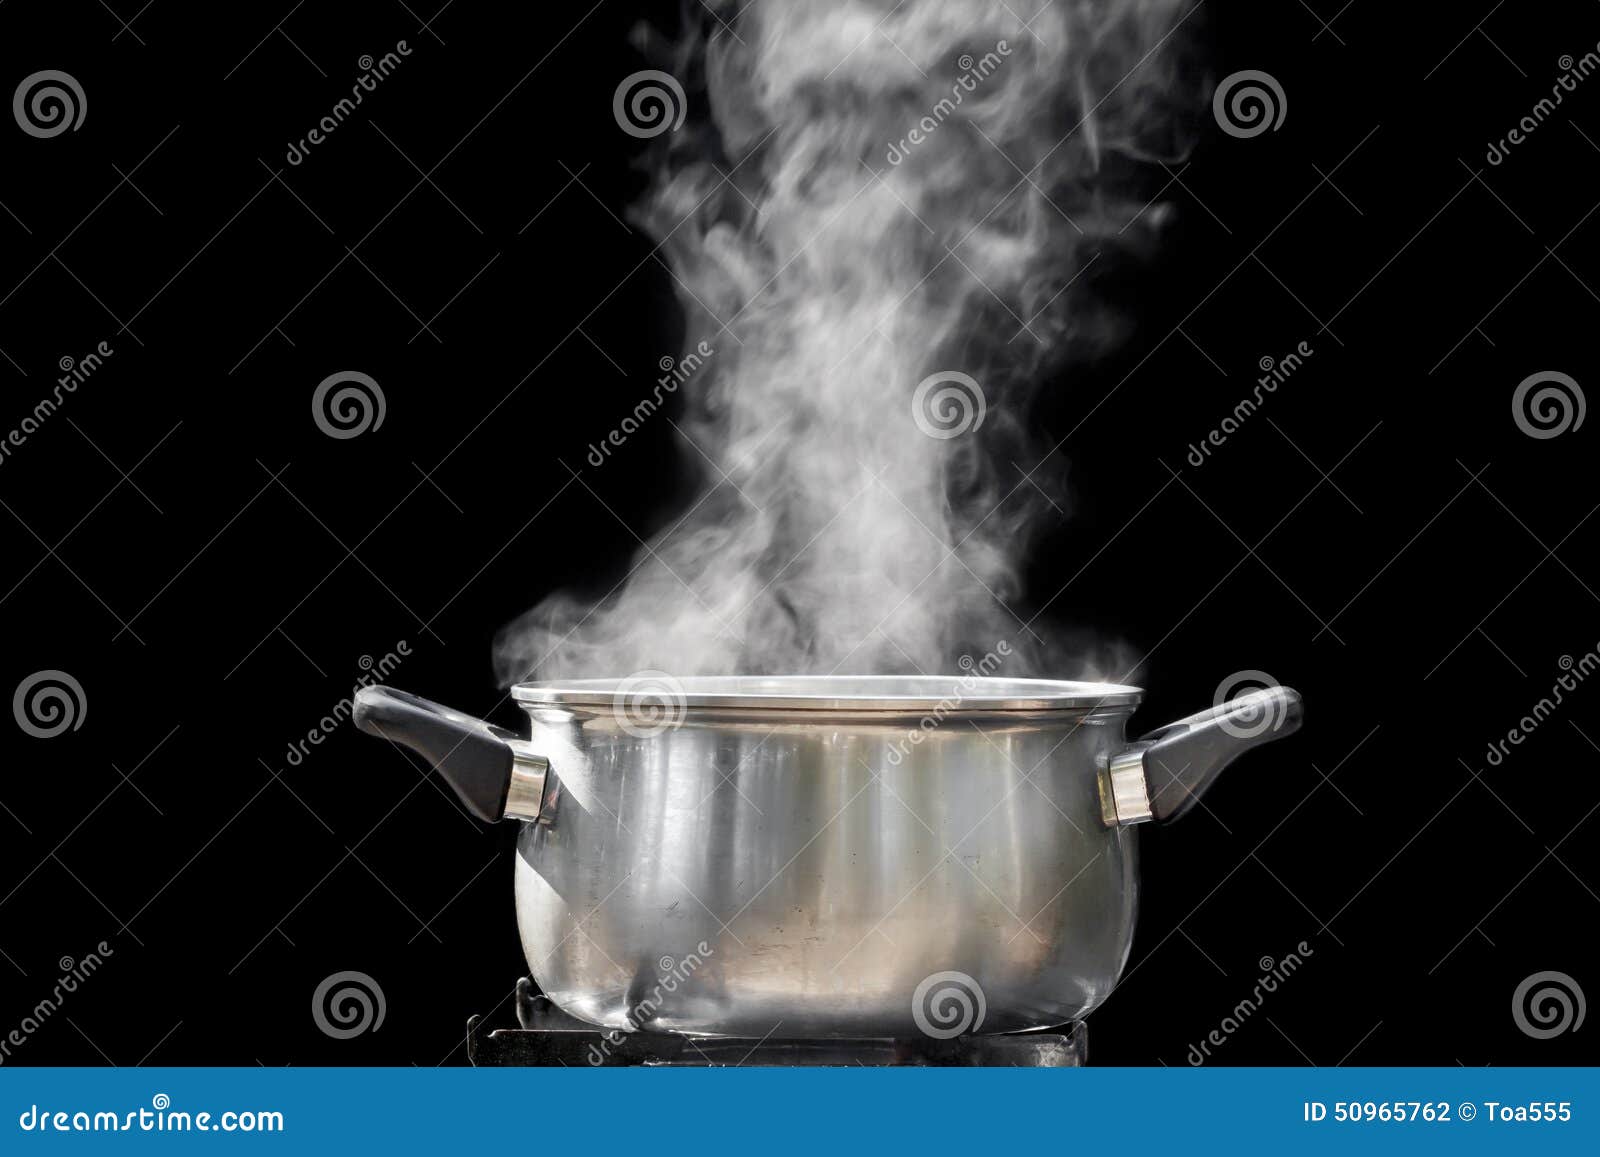 steam over cooking pot